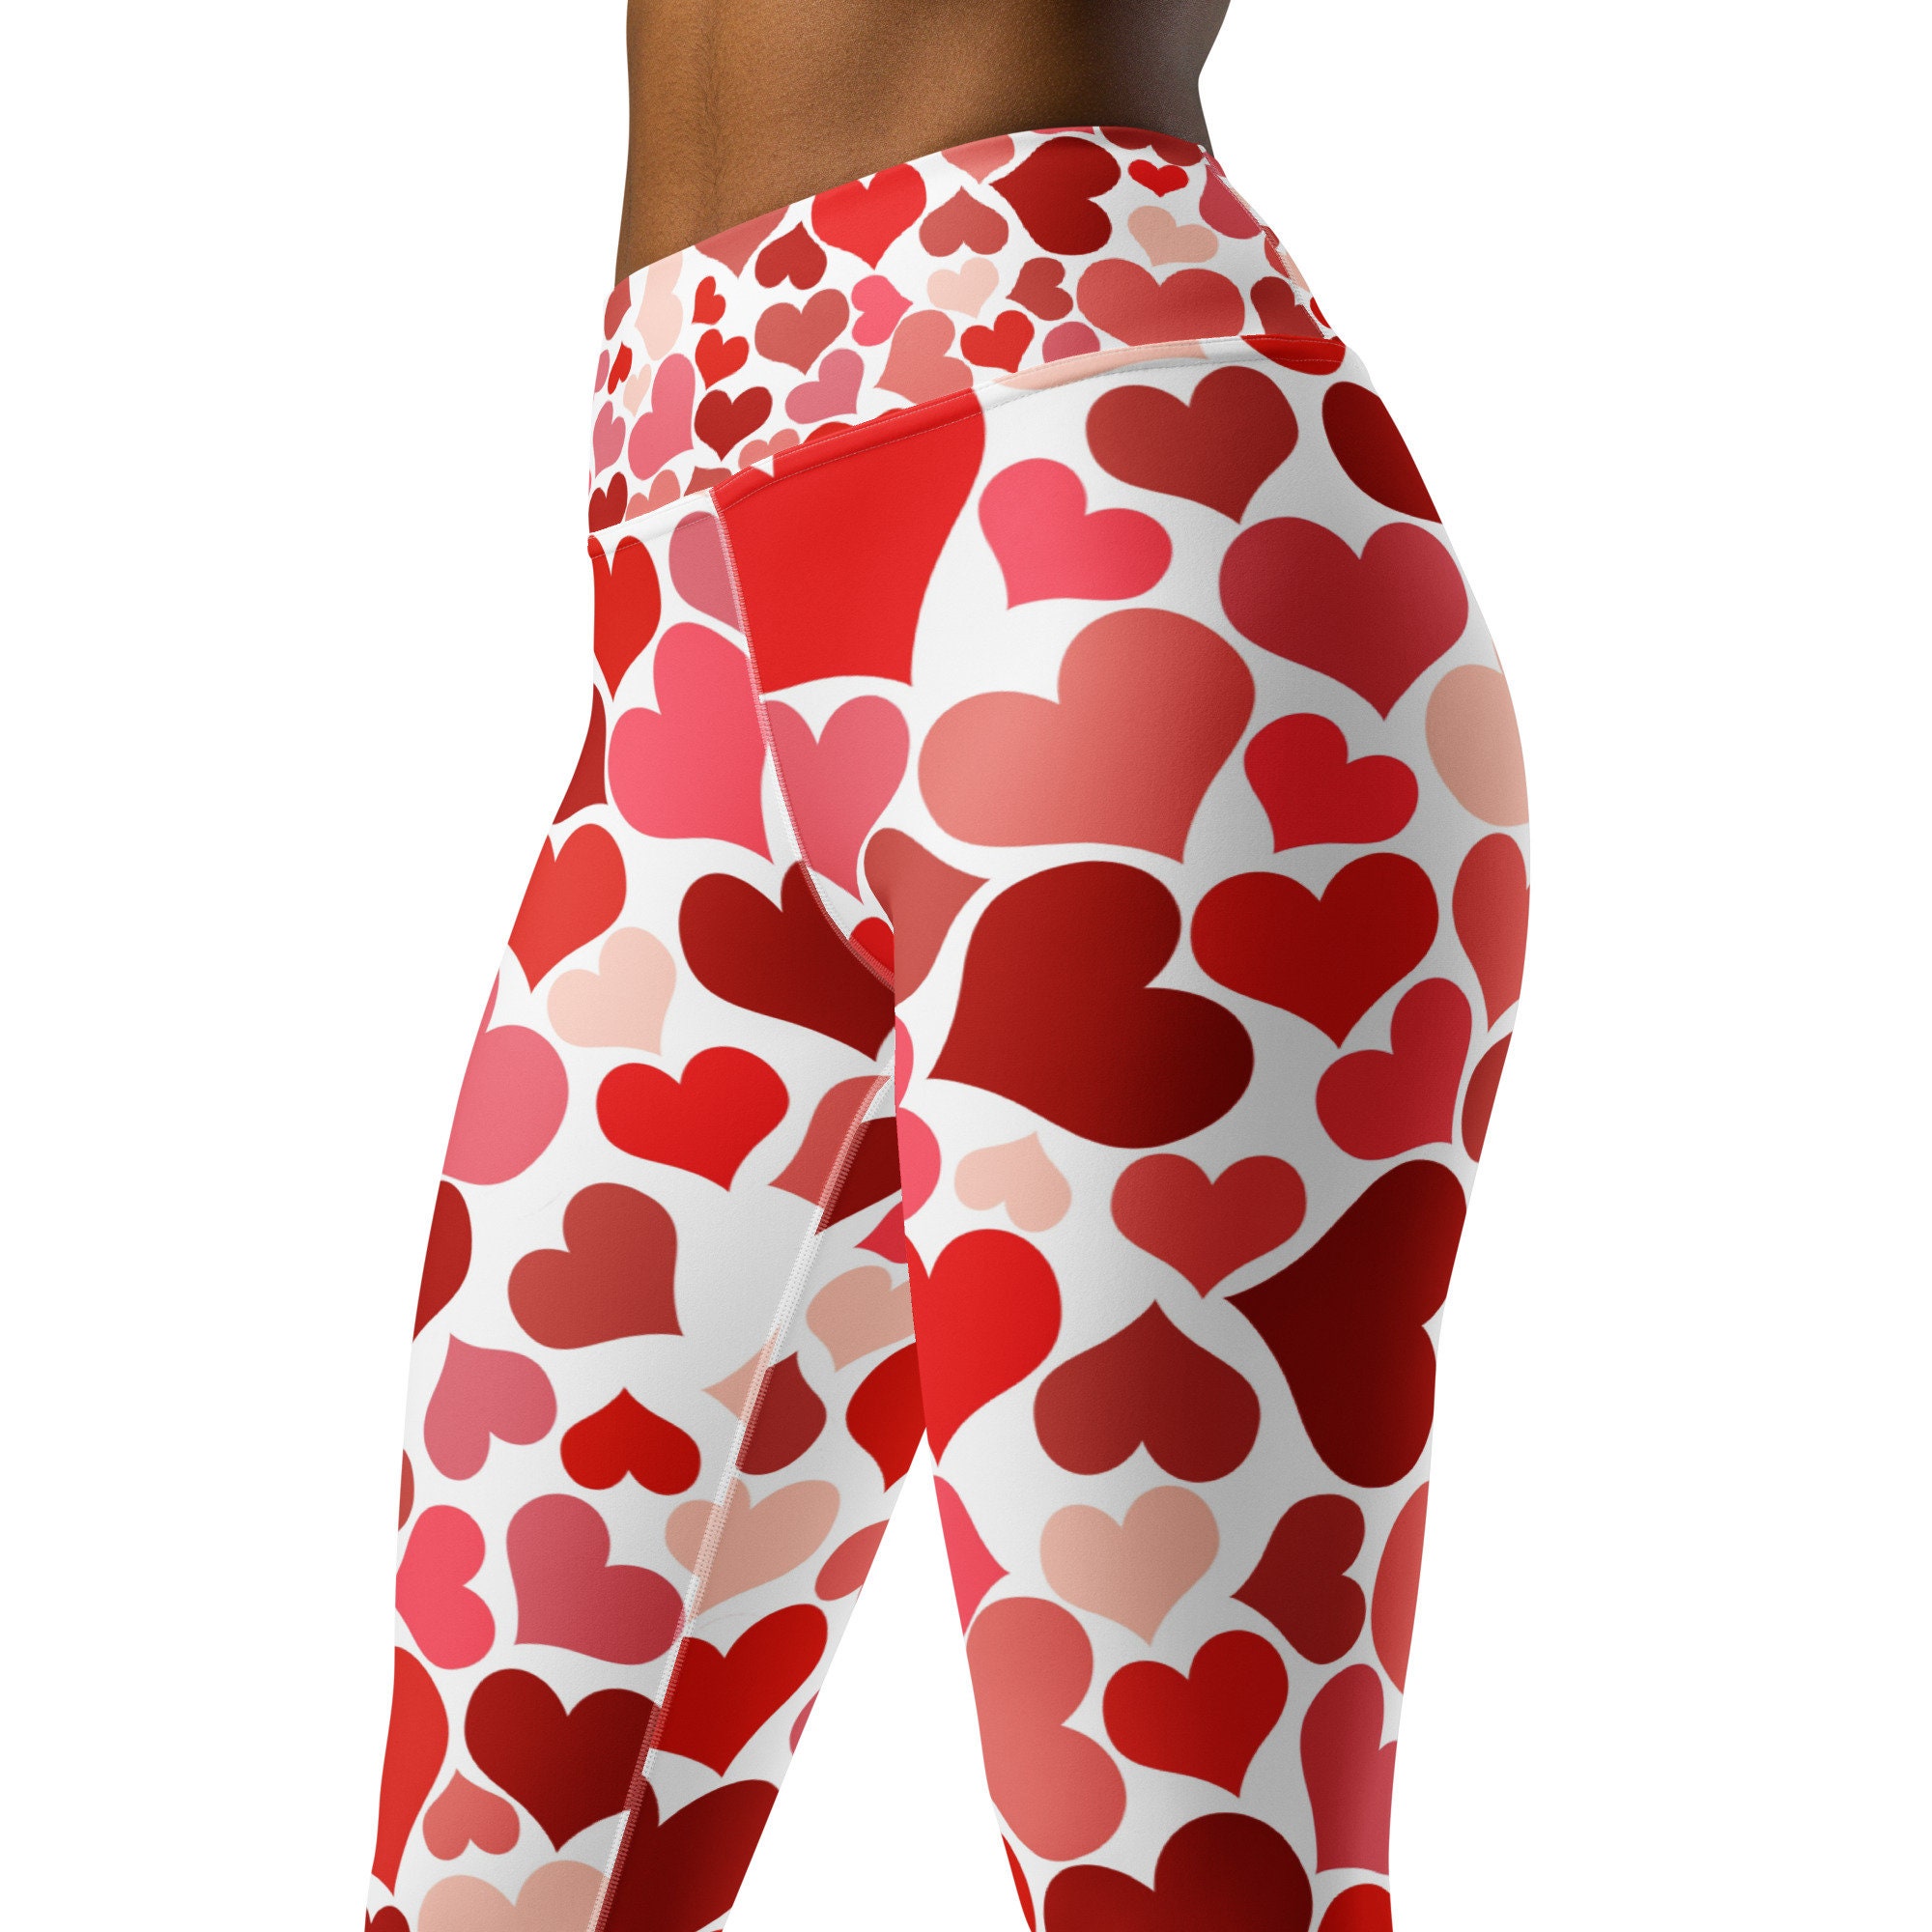 Vivian Valentine's Day Leggings Women's Teen Love Heart Stretch Pants /  Buttery Soft Fashion Tights /layering Look / Cute Gift for Her -  Canada